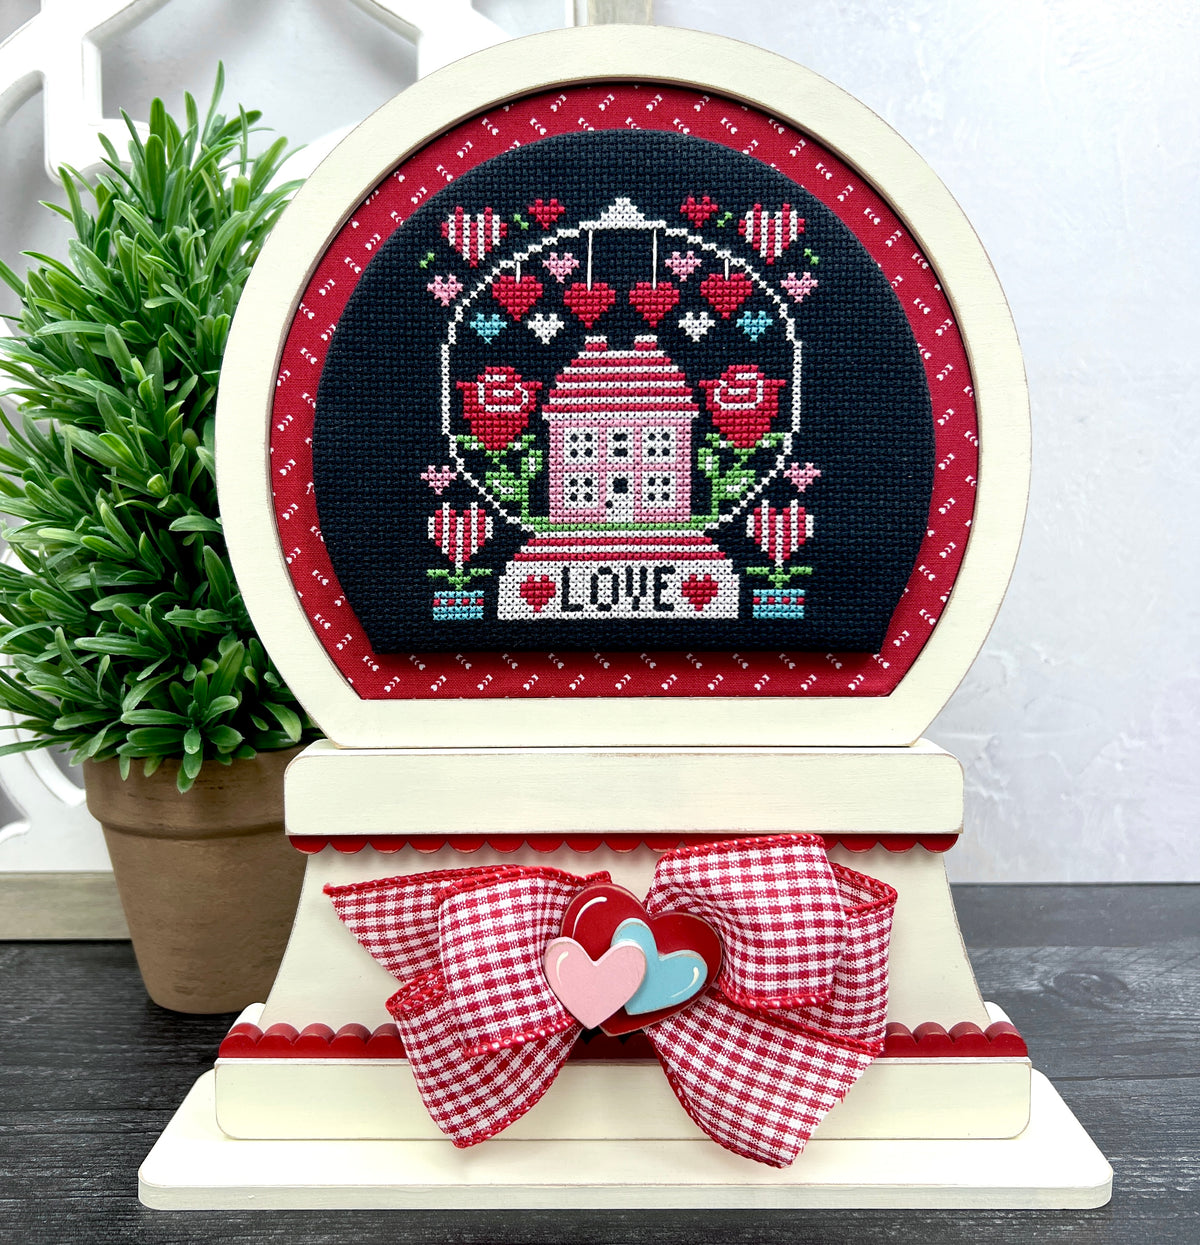 Unfinshed Wood Snow Globe Cross Stitch Display - Paisleys and Polka Dots